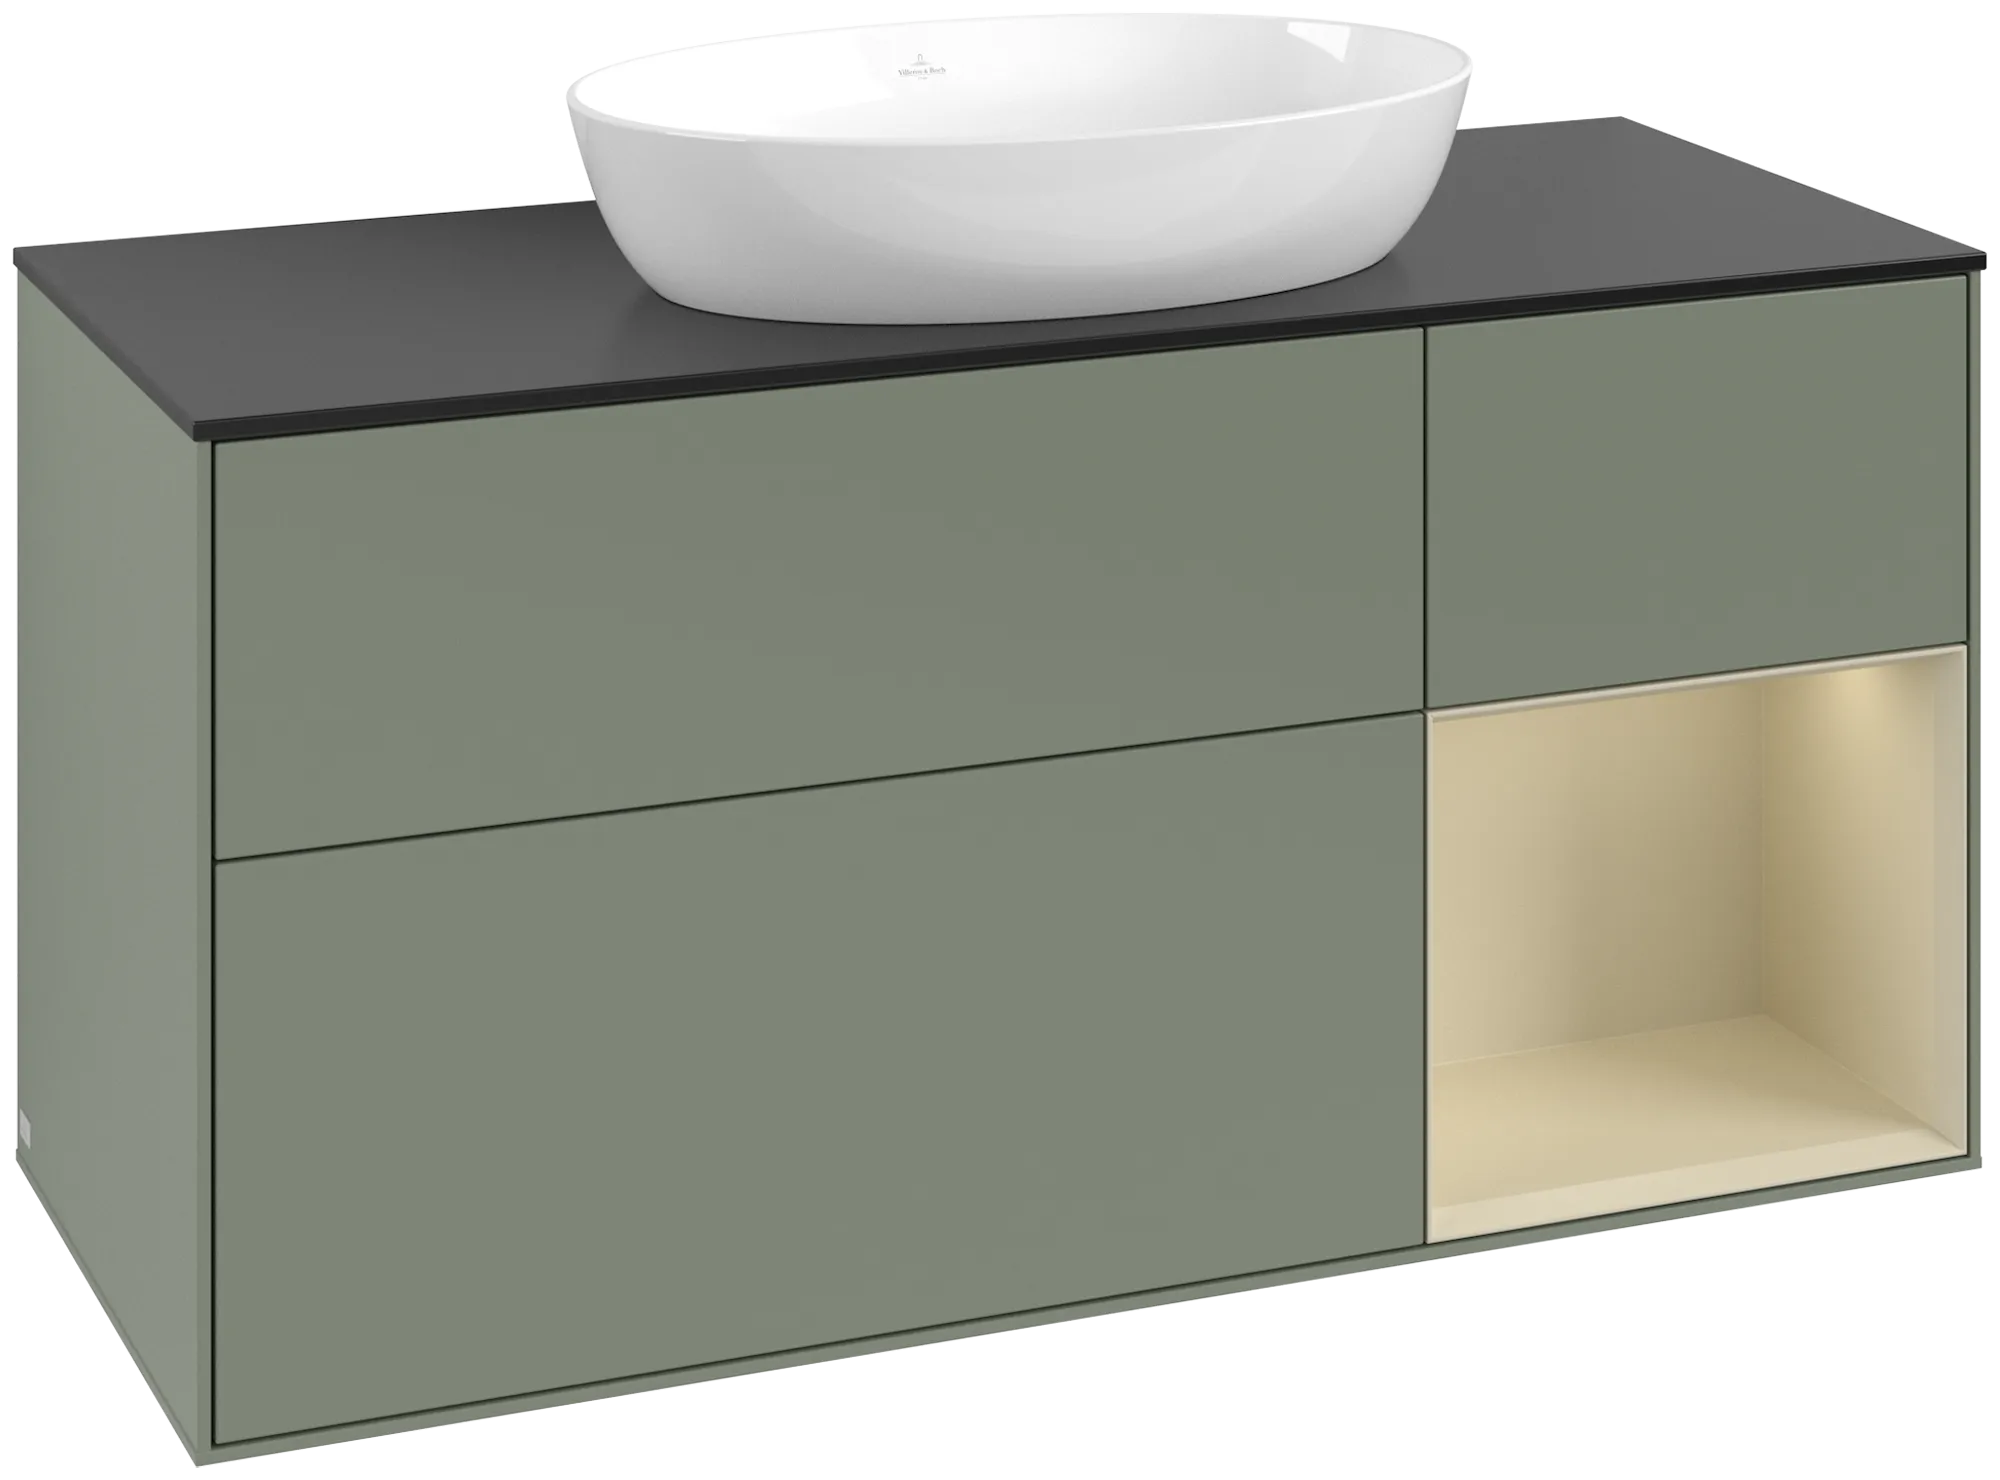 Picture of VILLEROY BOCH Finion Vanity unit, with lighting, 3 pull-out compartments, 1200 x 603 x 501 mm, Olive Matt Lacquer / Silk Grey Matt Lacquer / Glass Black Matt #FA72HJGM